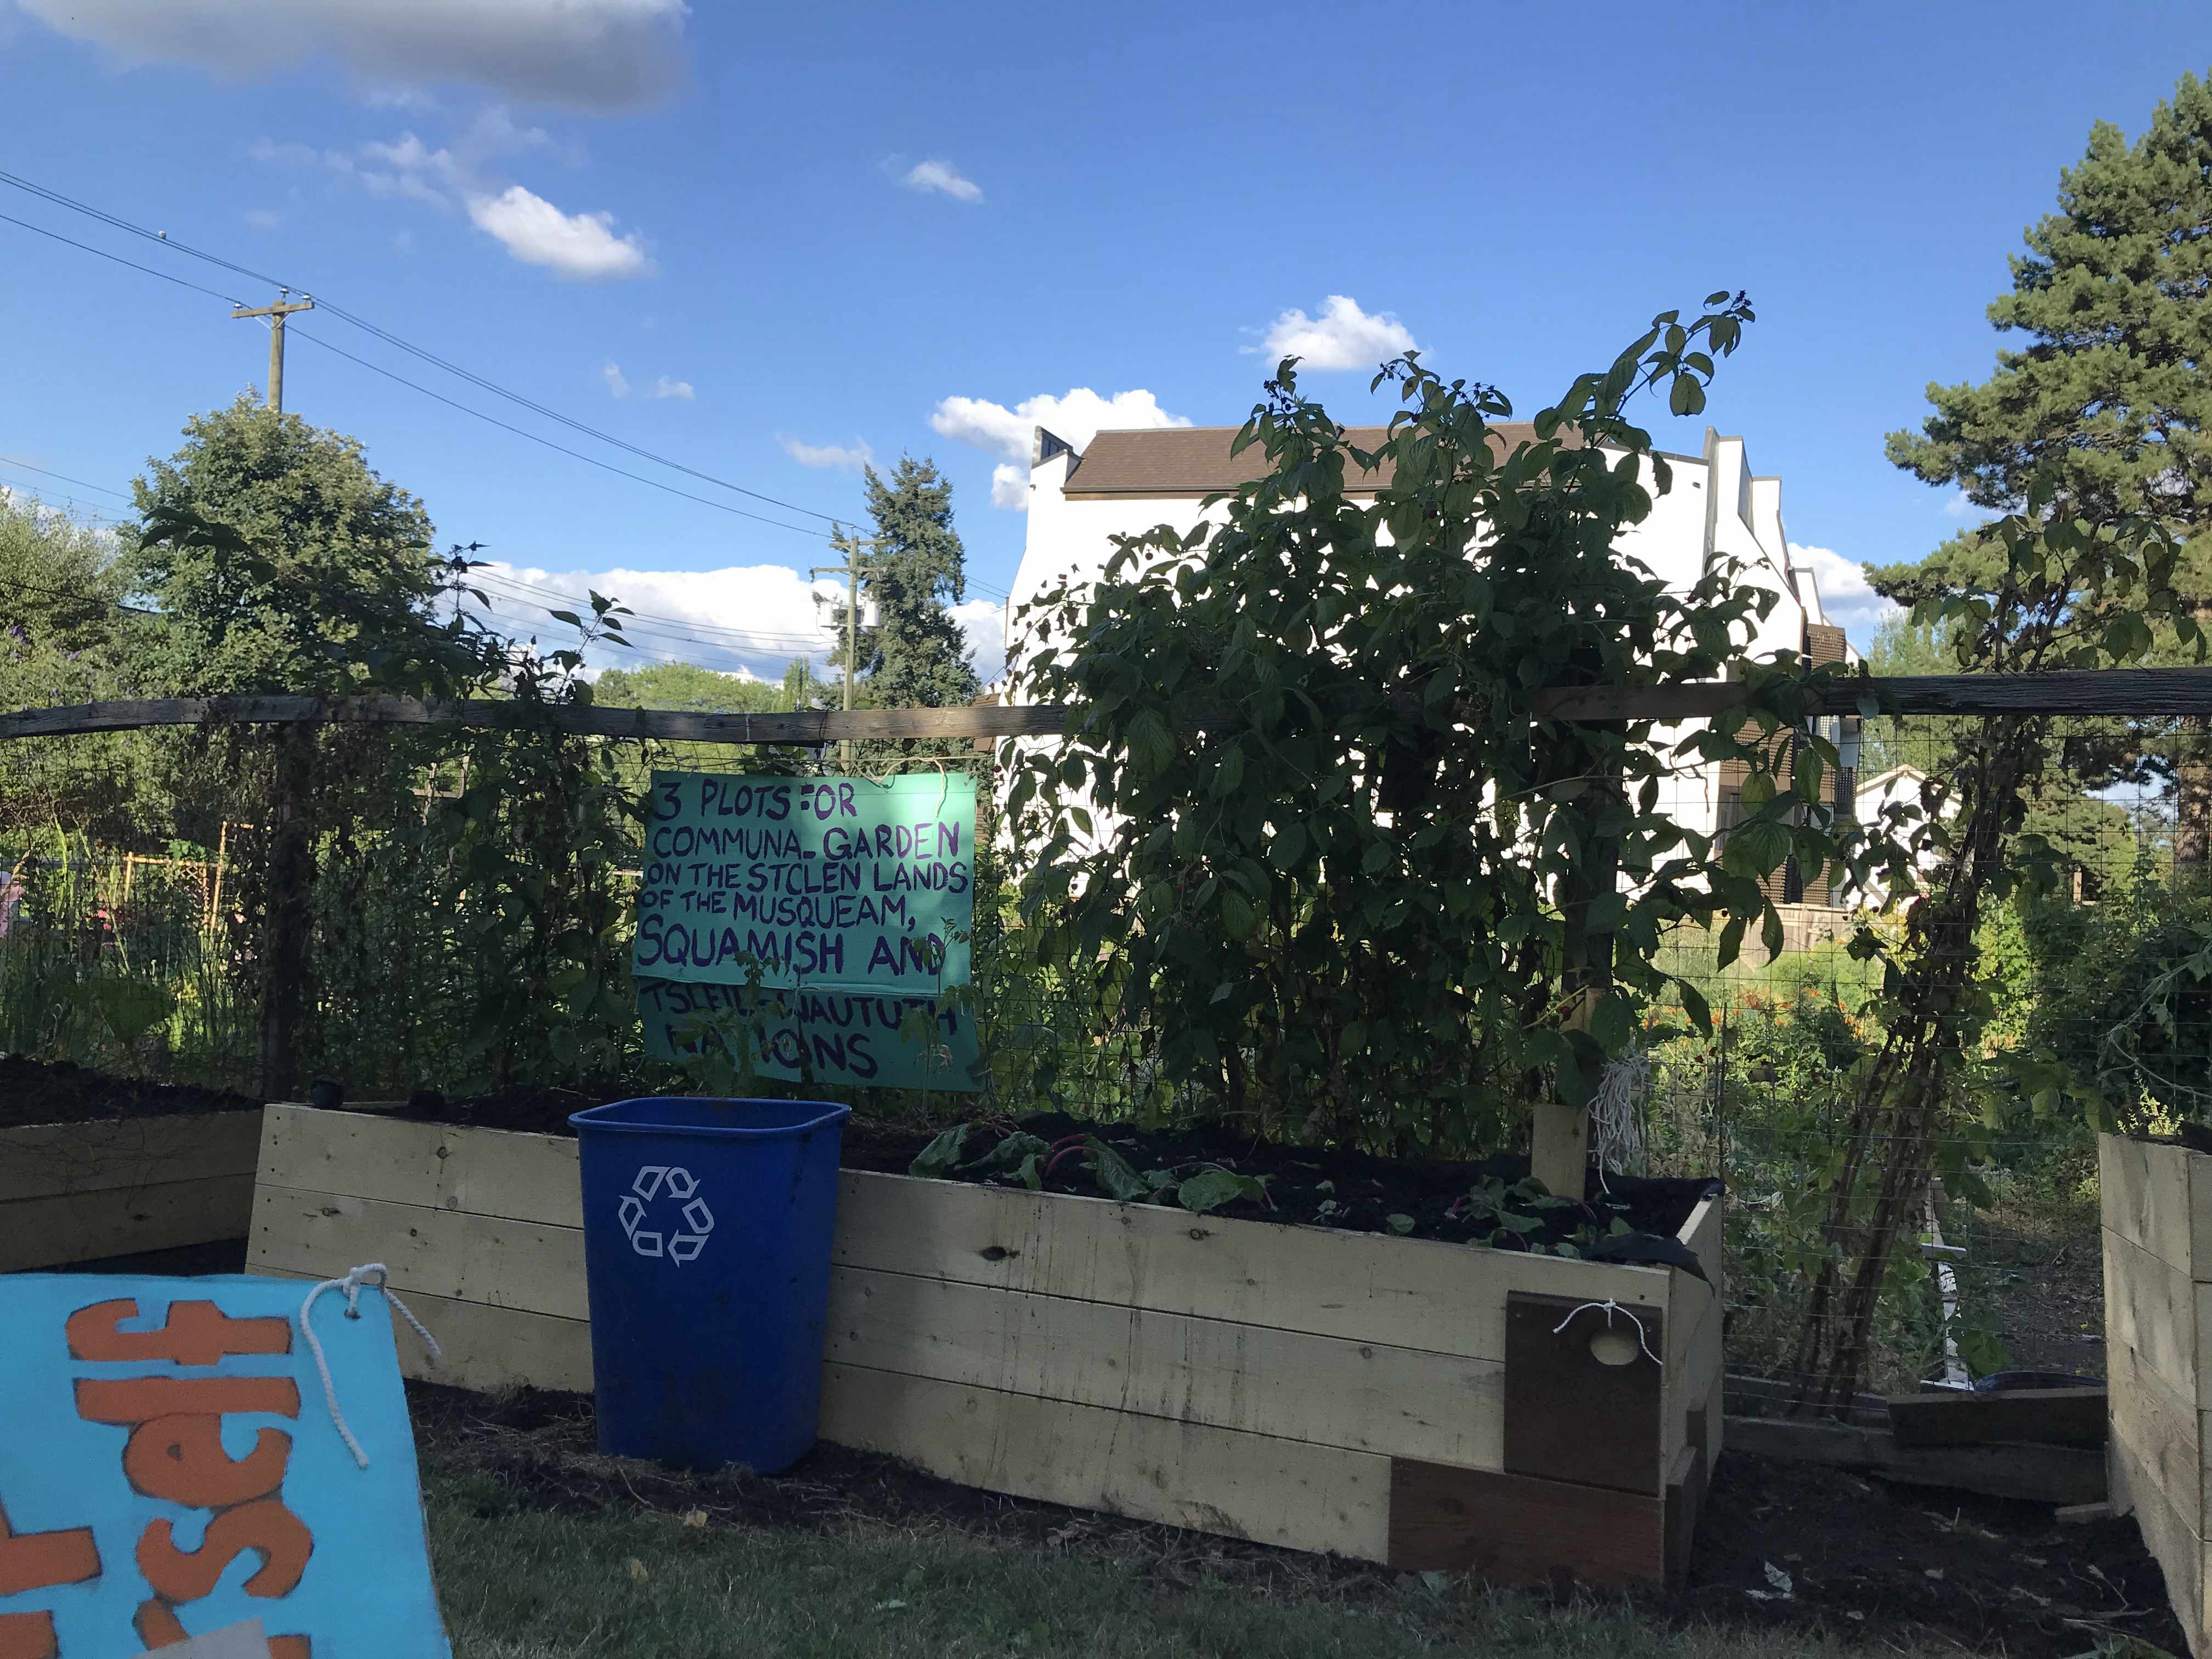 raised garden bed with  young plants growing inside them. there is a hand painted sign that reads “3 plots for communal garden on the stolen lands of the Musqueam, Squamish and Tsleil-Waututh nations. clouds and clear sky patches behind in the background